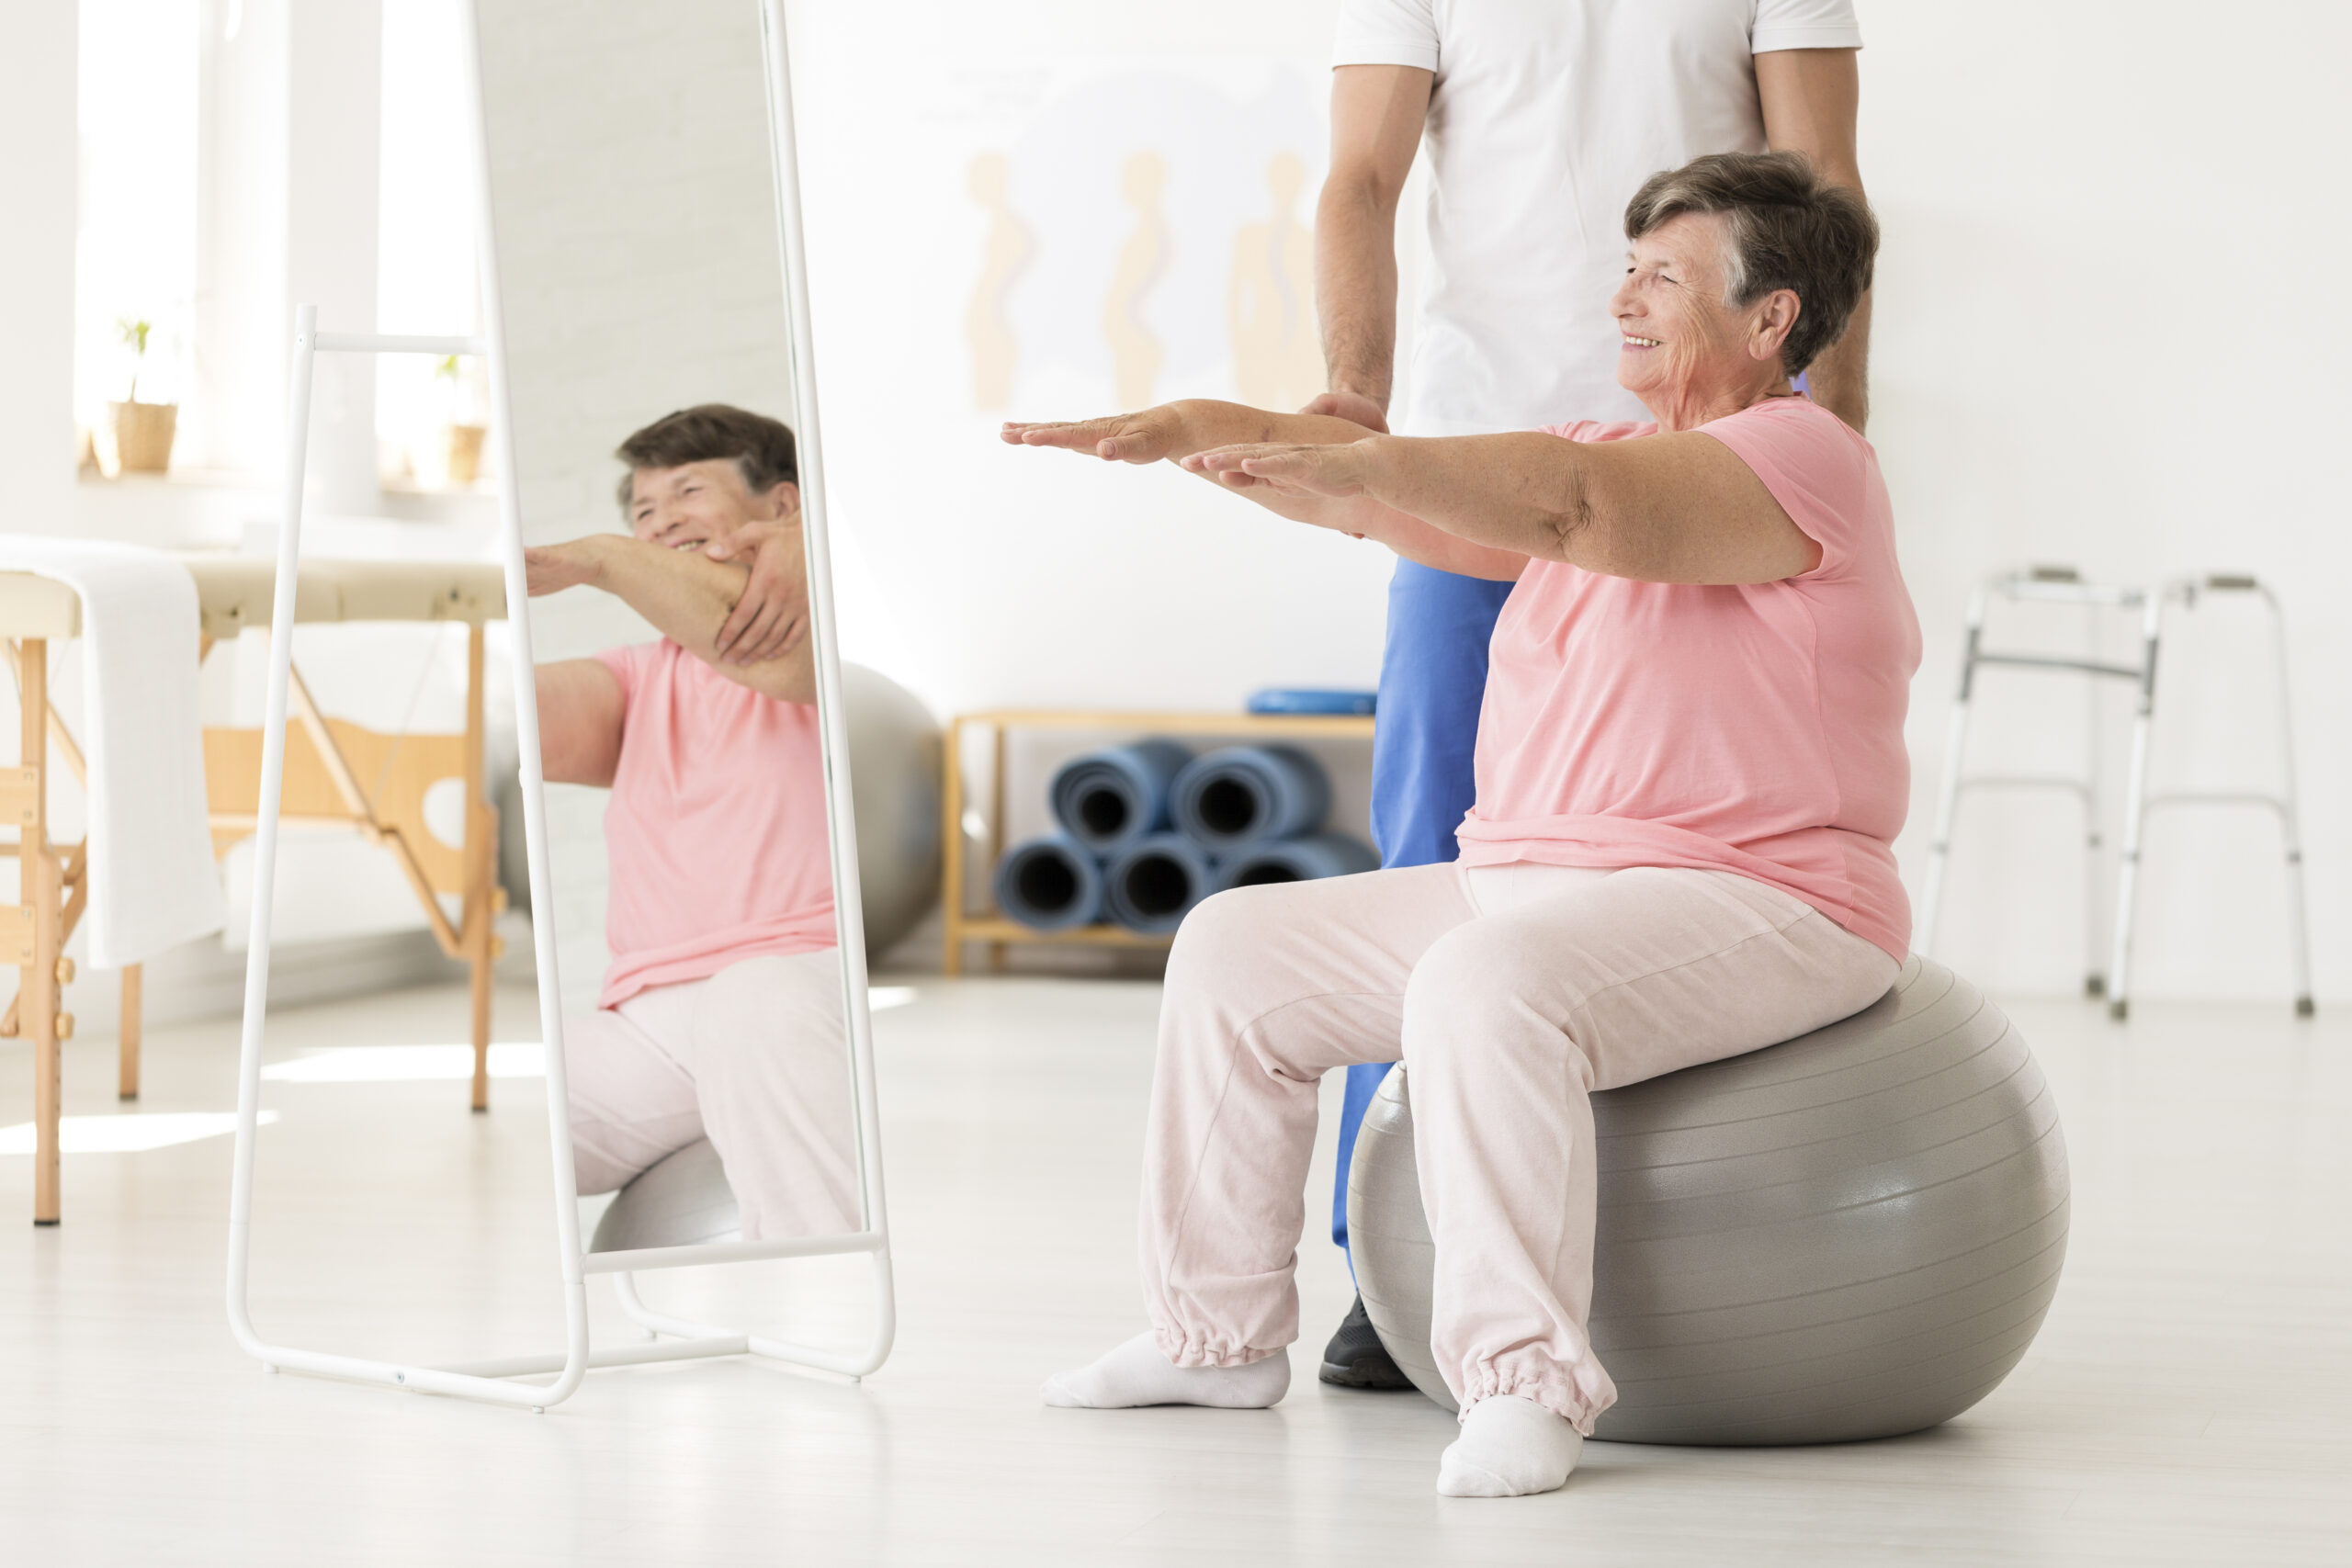 Ask the Doctors: Older adults still need regular exercise